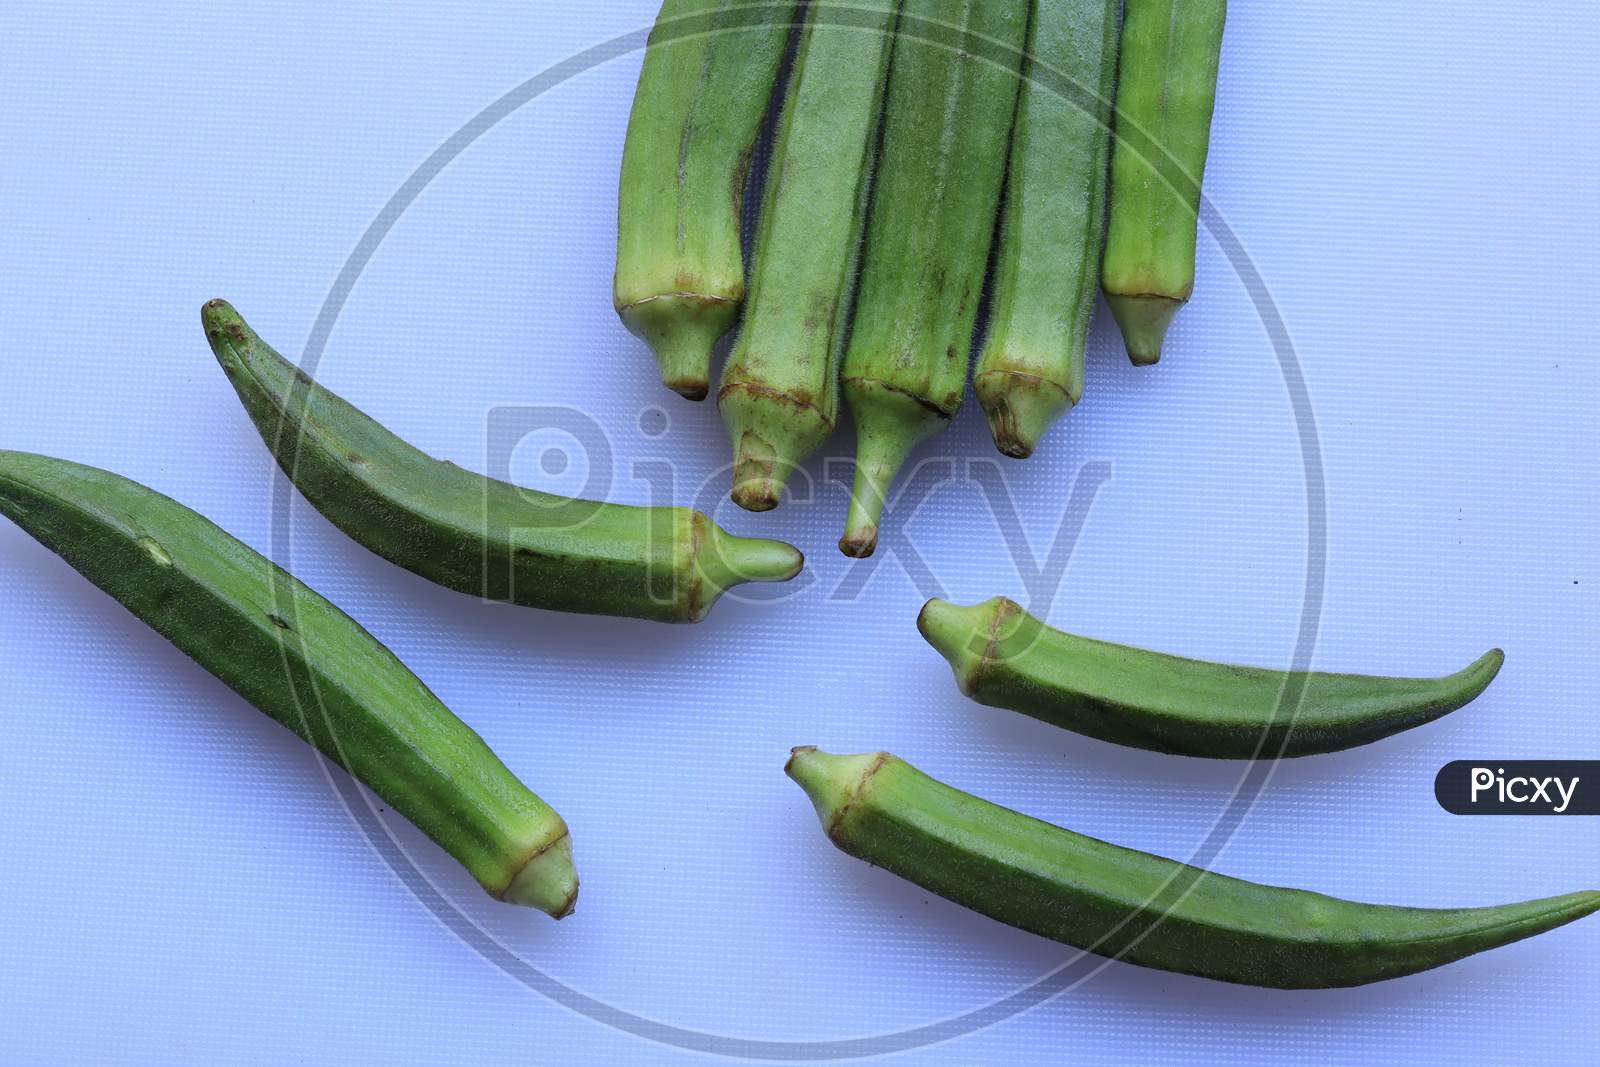 Fresh Young Lady Fingers or Okra in white background